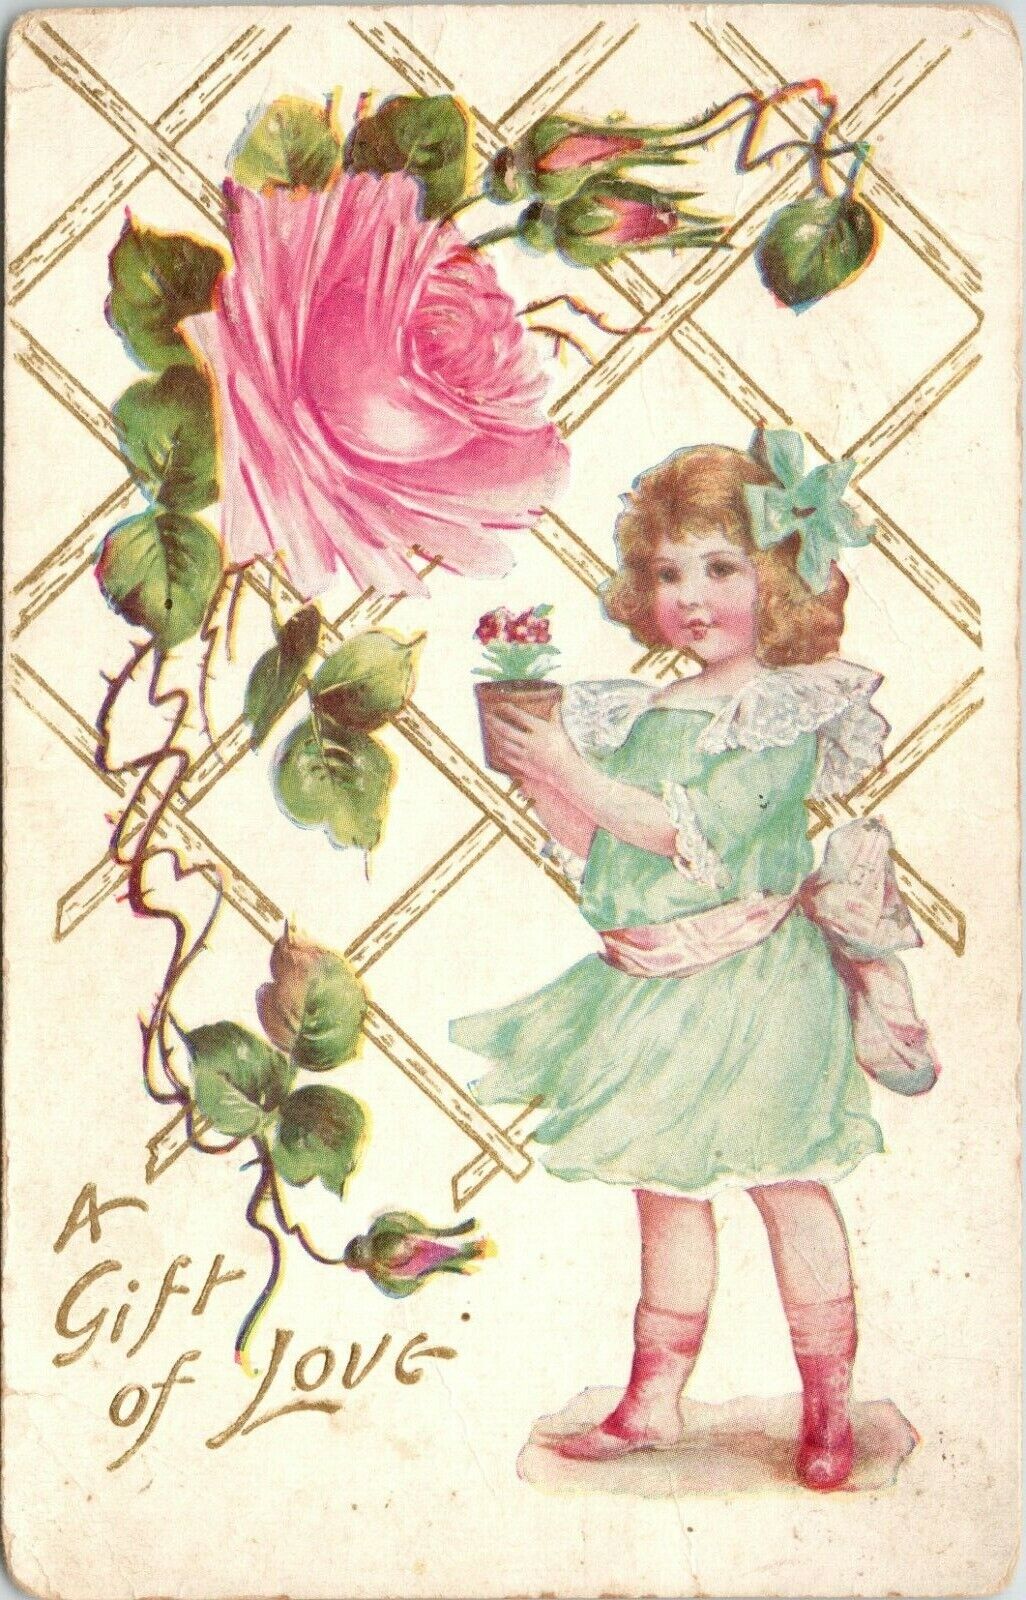 C.1909 Adorable Girl W Giant Pink Rose Fantasy GIFT OF LOVE Embossed Postcard 79